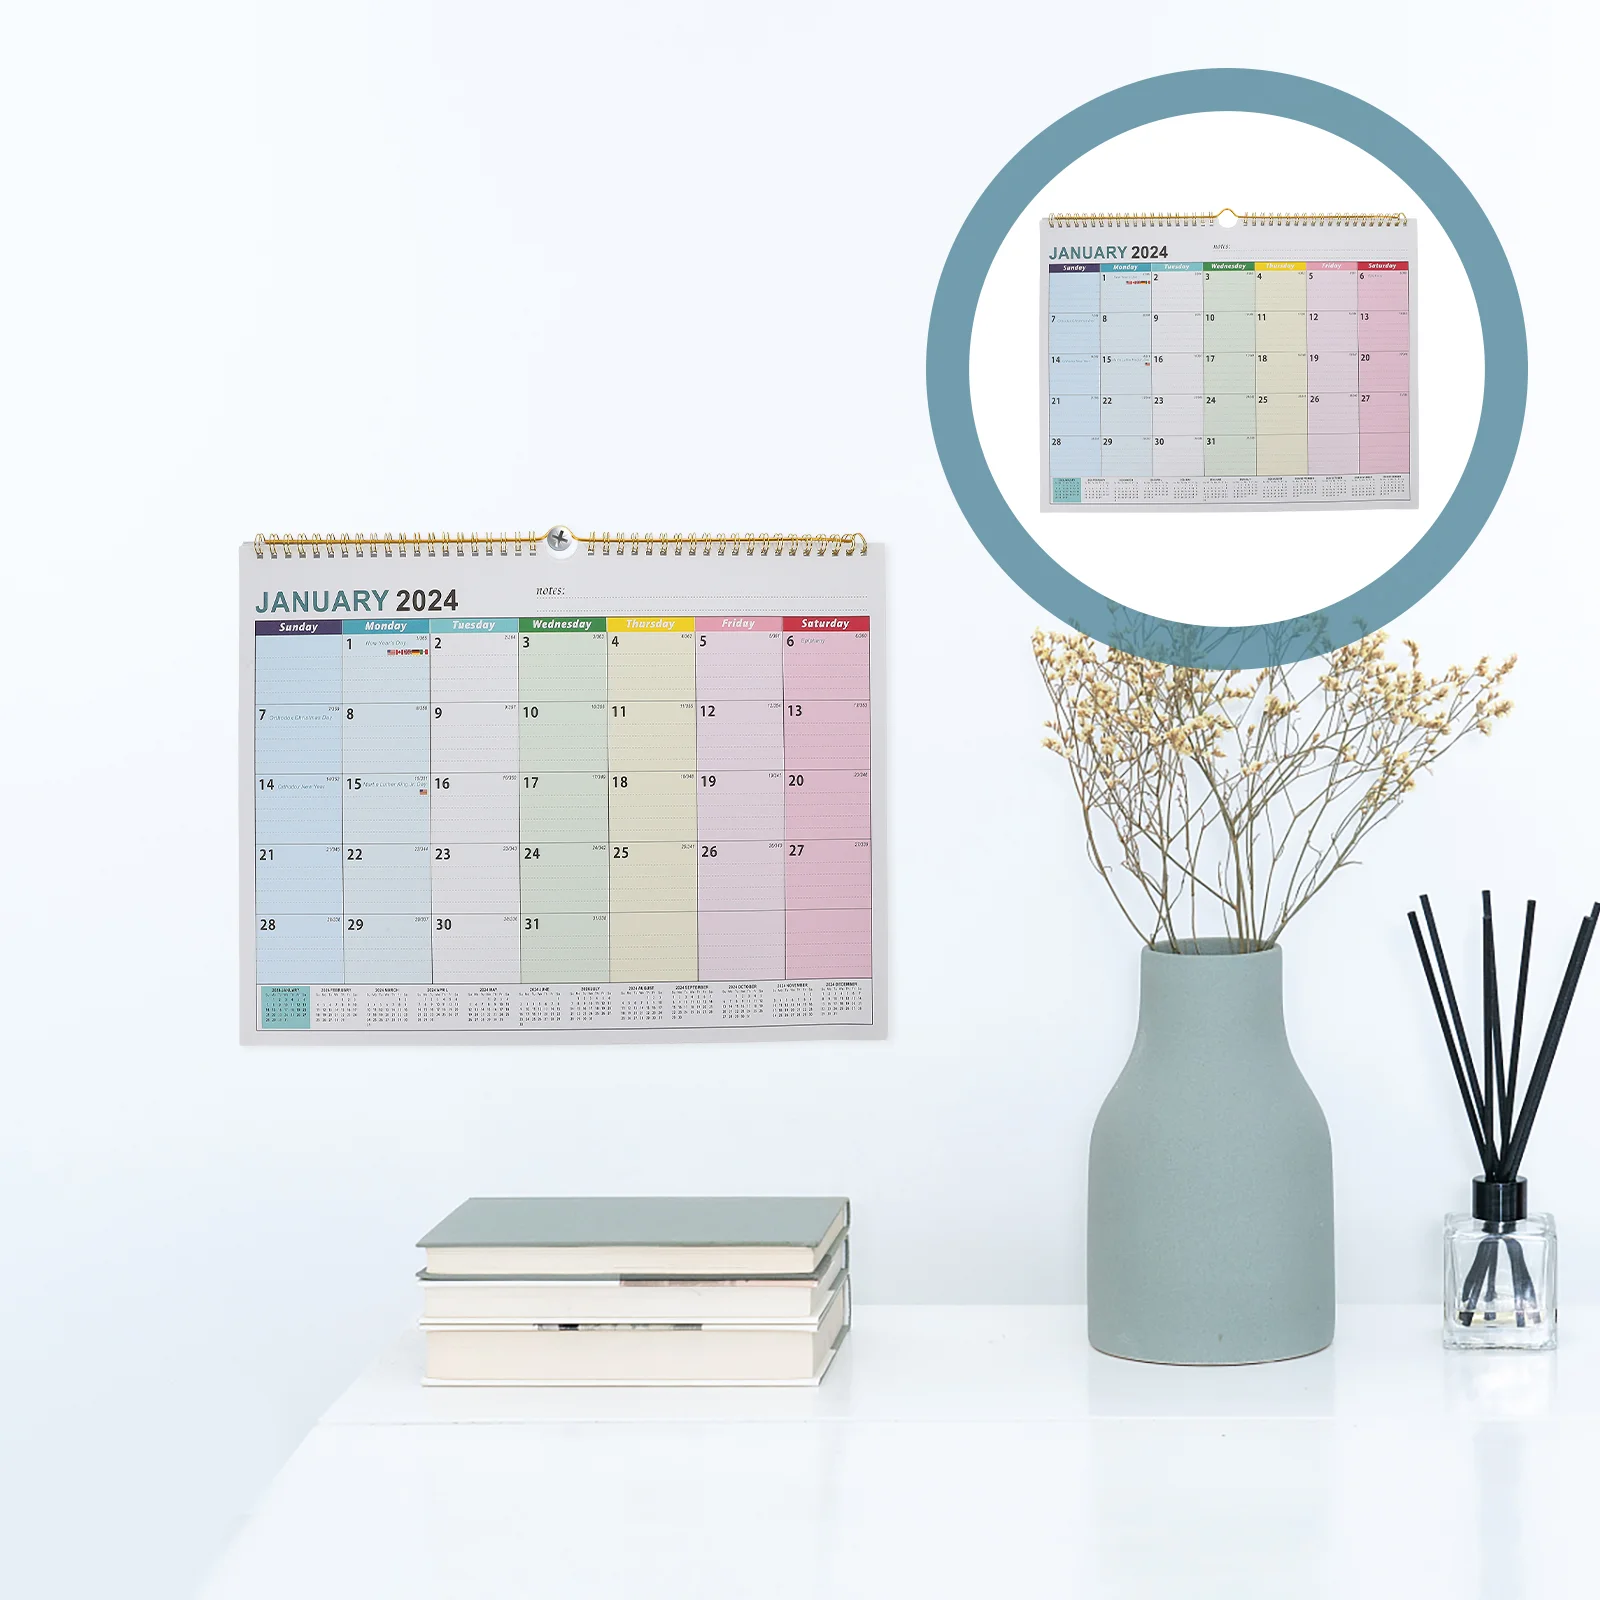 2024-2025 Wall Calendar Hanging Schedule From Jan. 2024- Jun. 2025 Table Planner New Year Home Office